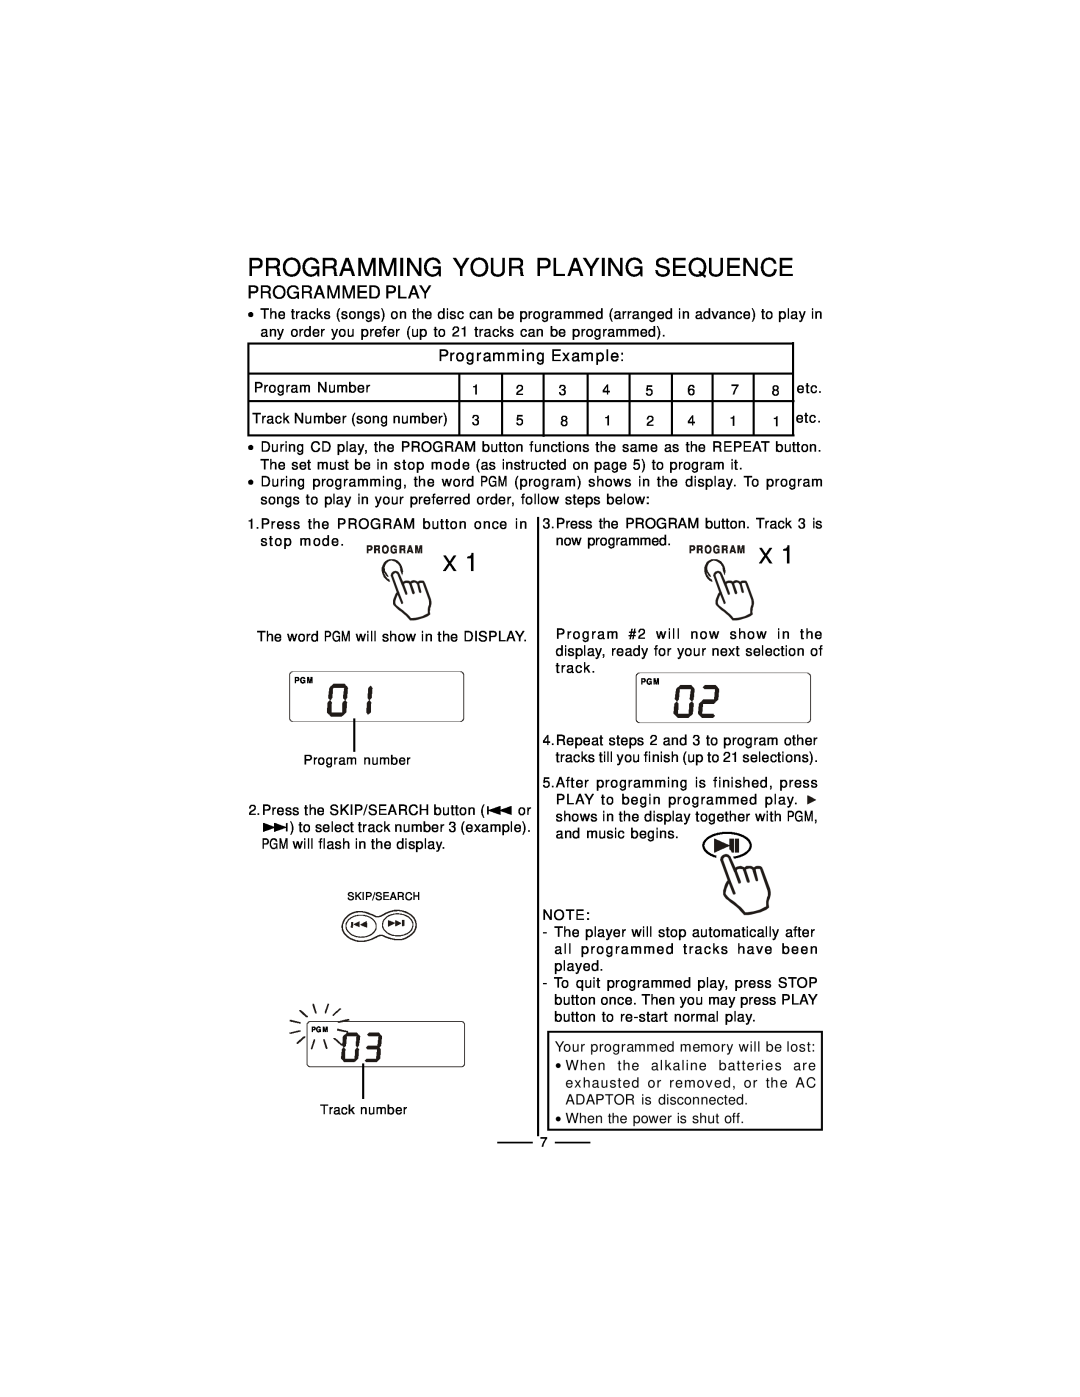 Lenoxx Electronics CD-61 operating instructions Programming Your Playing Sequence, Programmed Play 